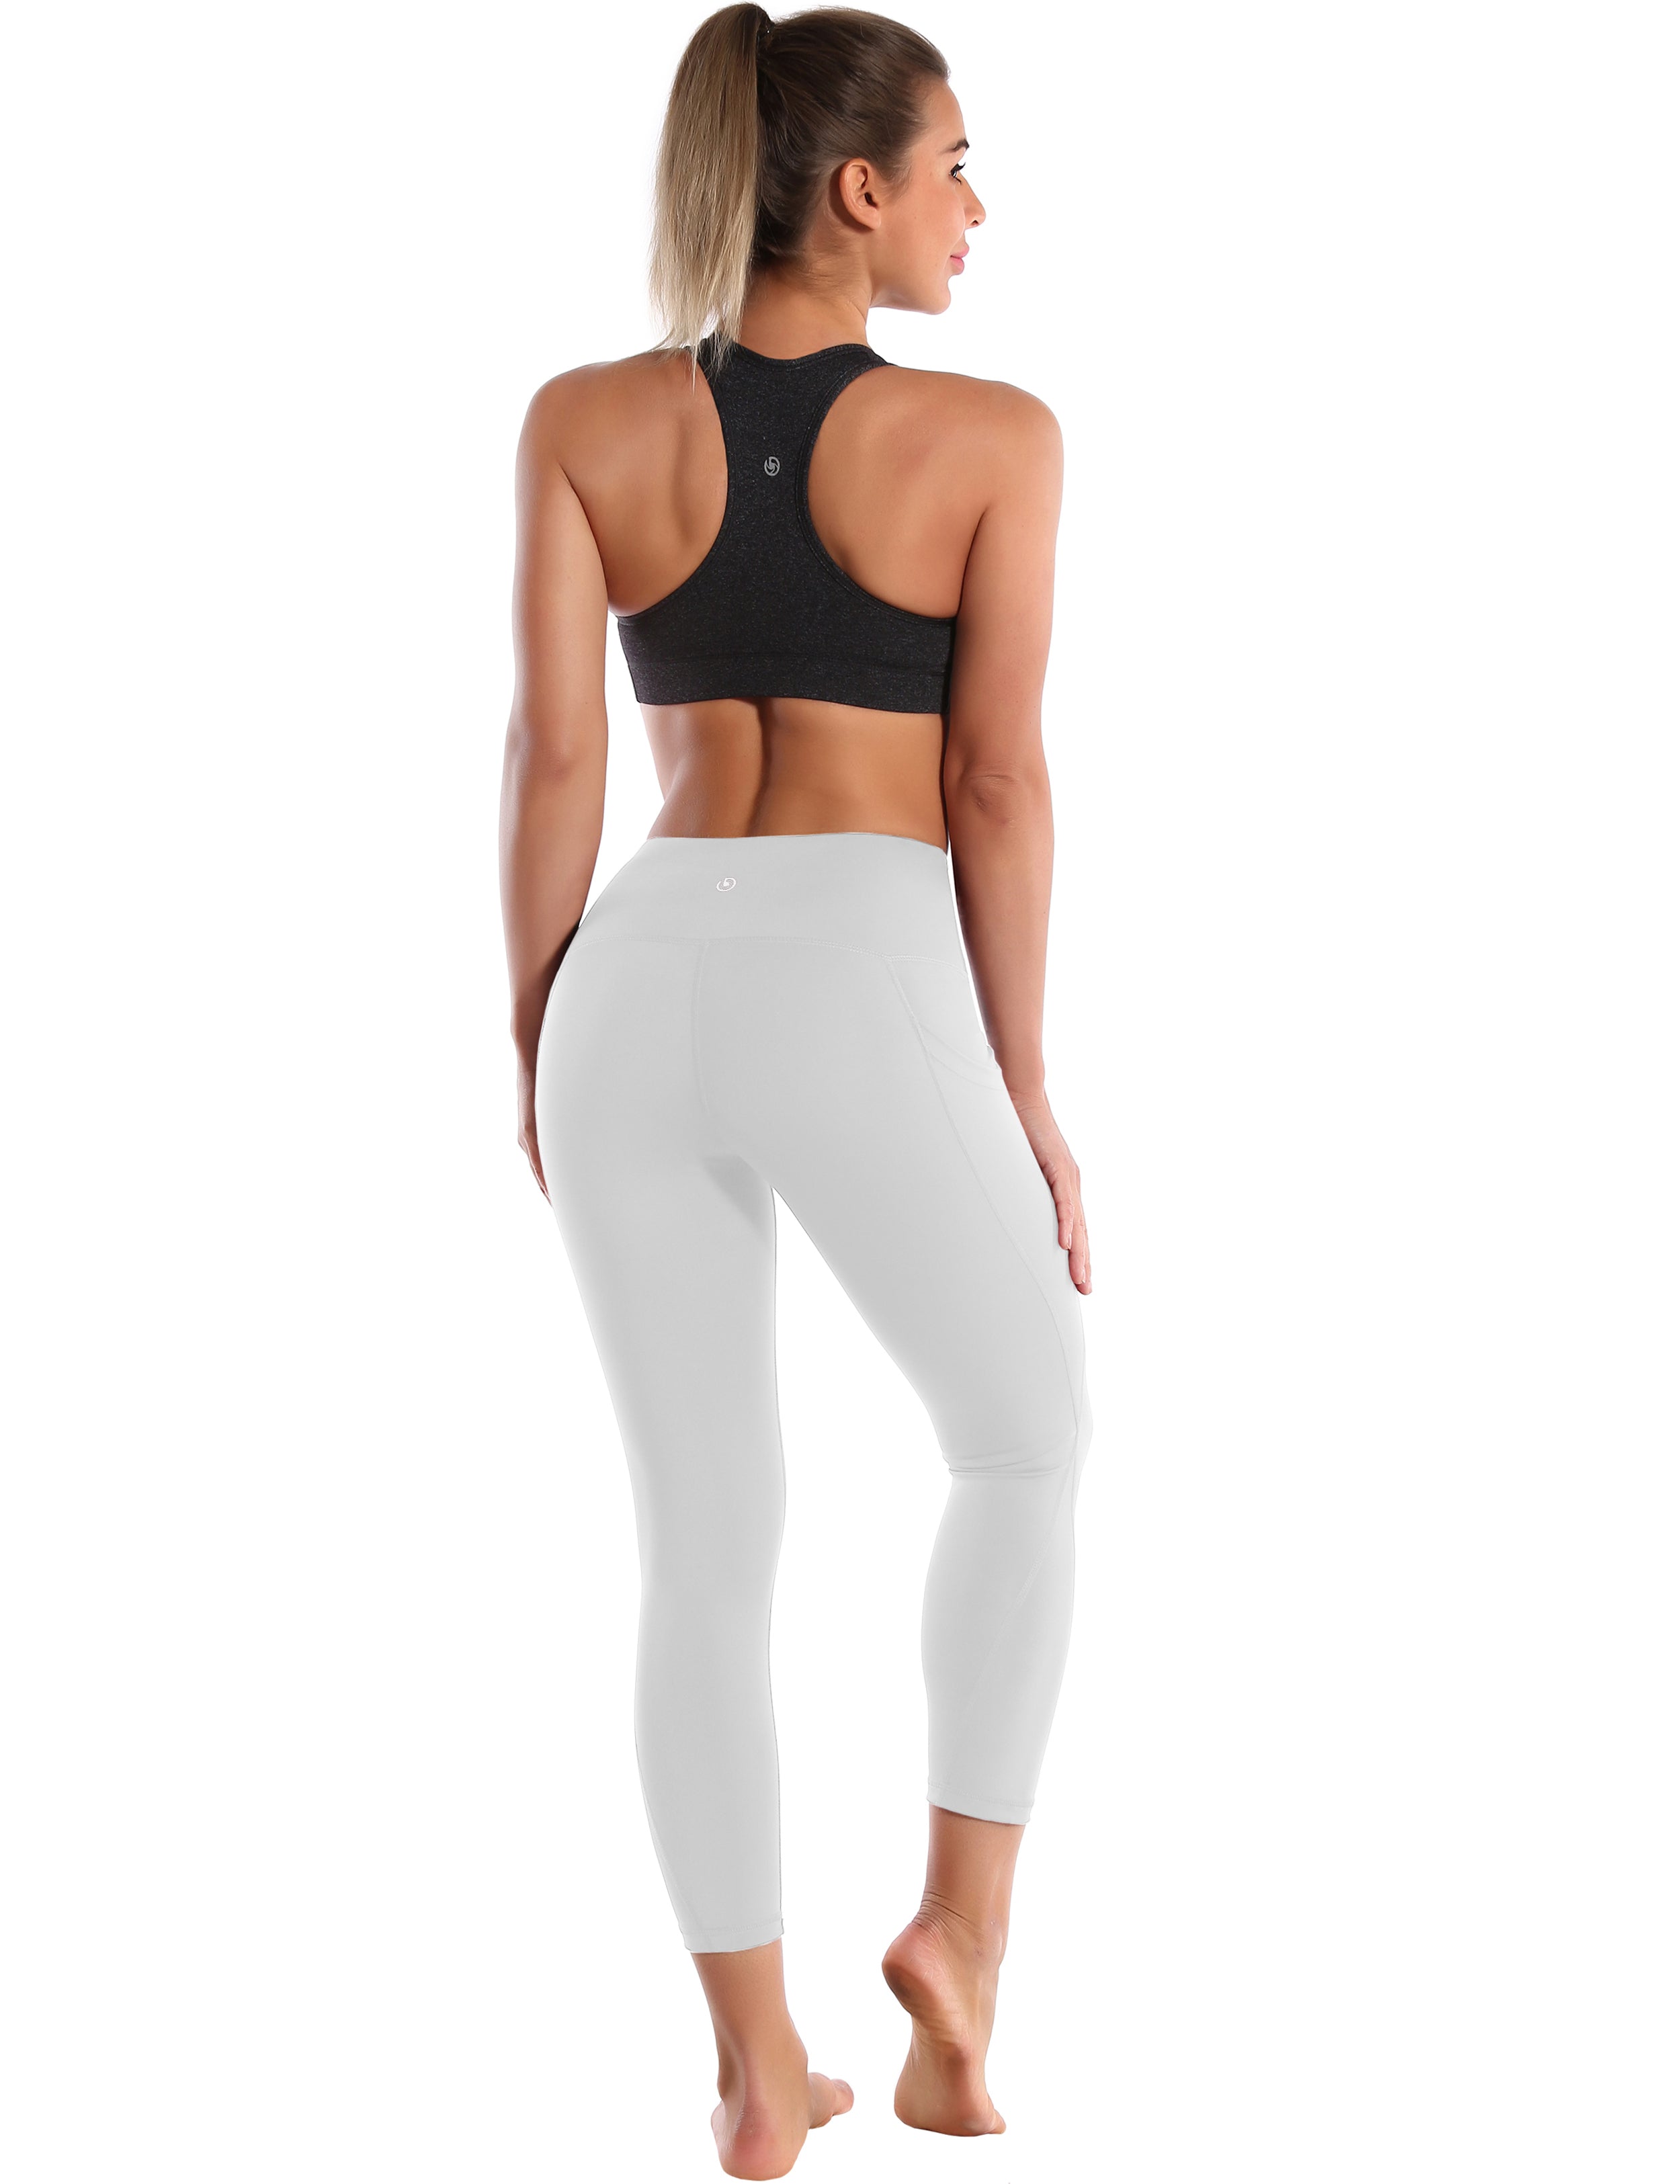 22" High Waist Side Pockets Capris lightgray 75%Nylon/25%Spandex Fabric doesn't attract lint easily 4-way stretch No see-through Moisture-wicking Tummy control Inner pocket